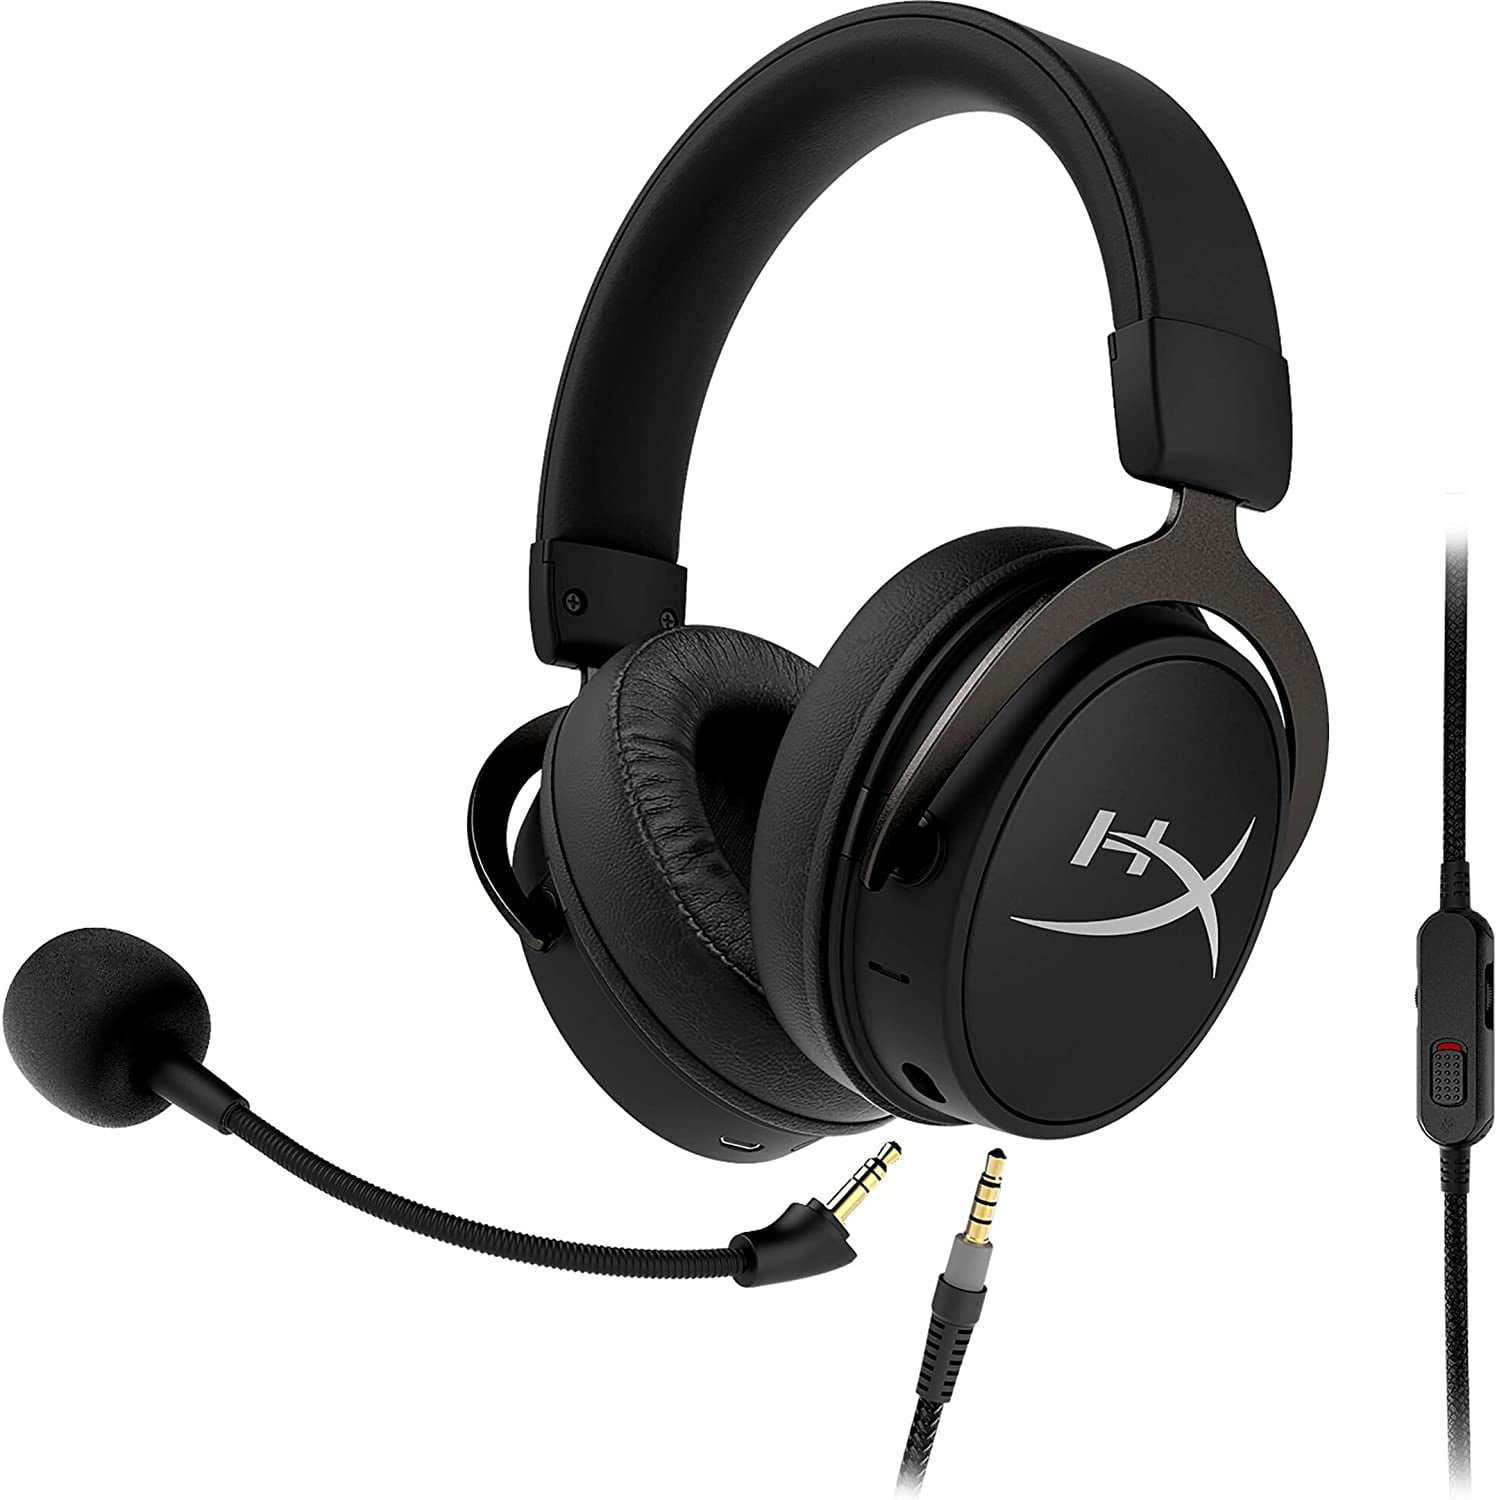 dosili Cloud - Wired Gaming Headset Bluetooth Game and Go Detachable Microphone Signature HyperX Comfort Lightweight Platform Compatible - Black - Walmart.com